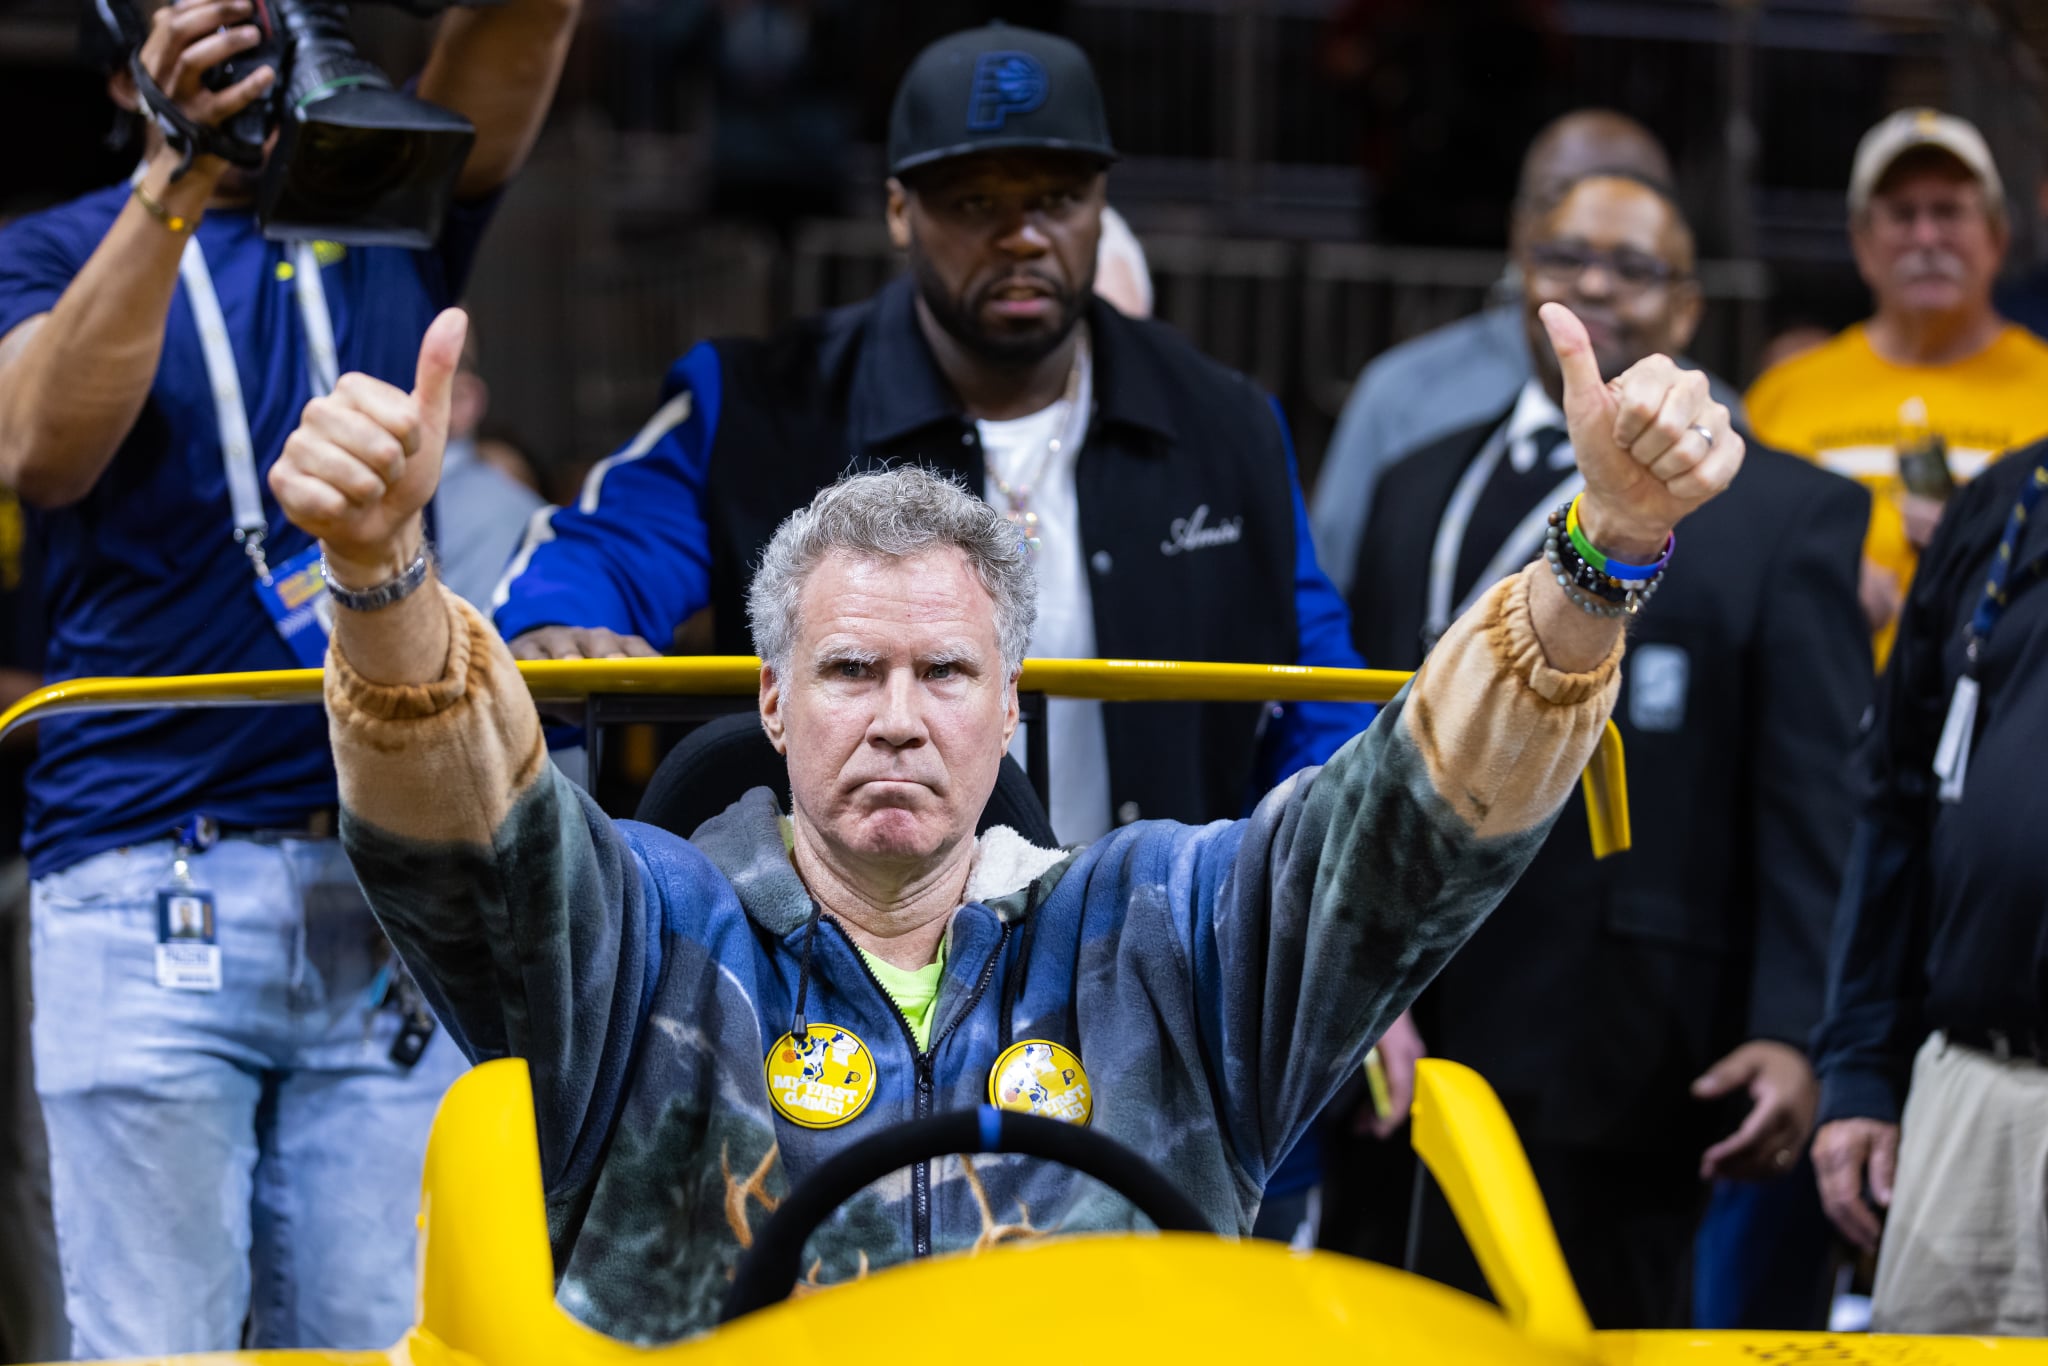 INDIANAPOLIS, IN - MARCH 06: Will Ferrell is introduced to the crowd before the Indiana Pacers and Philadelphia 76ers game at Gainbridge Fieldhouse on March 6, 2023 in Indianapolis, Indiana. NOTE TO USER: User expressly acknowledges and agrees that, by downloading and or using this photograph, User is consenting to the terms and conditions of the Getty Images Licence Agreement.  (Photo by Michael Hickey/Getty Images)